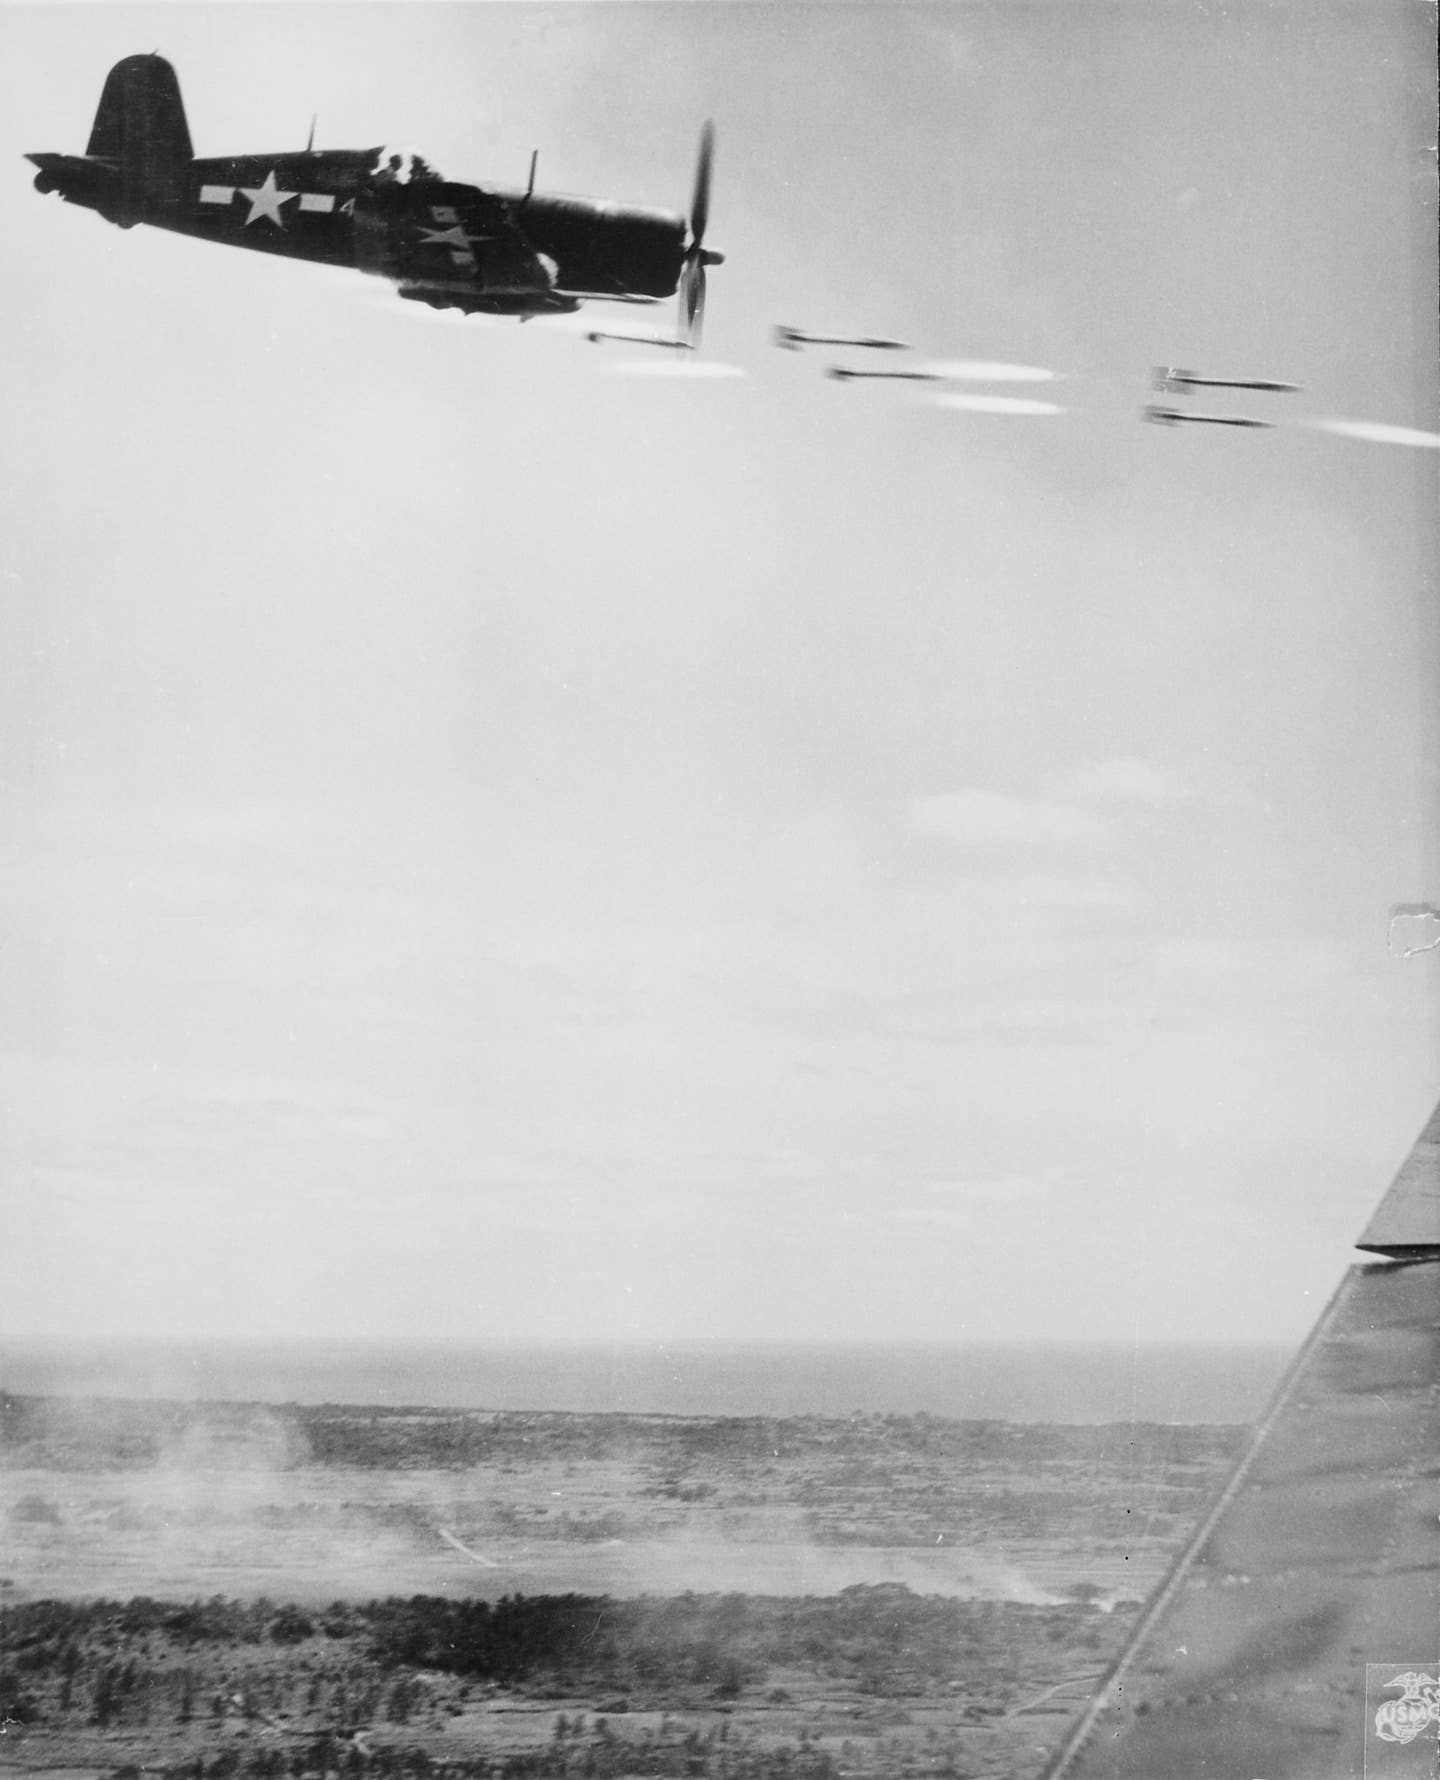 A Vought F4U Corsair fires rockets at ground targets on Okinawa. (DOD photo)